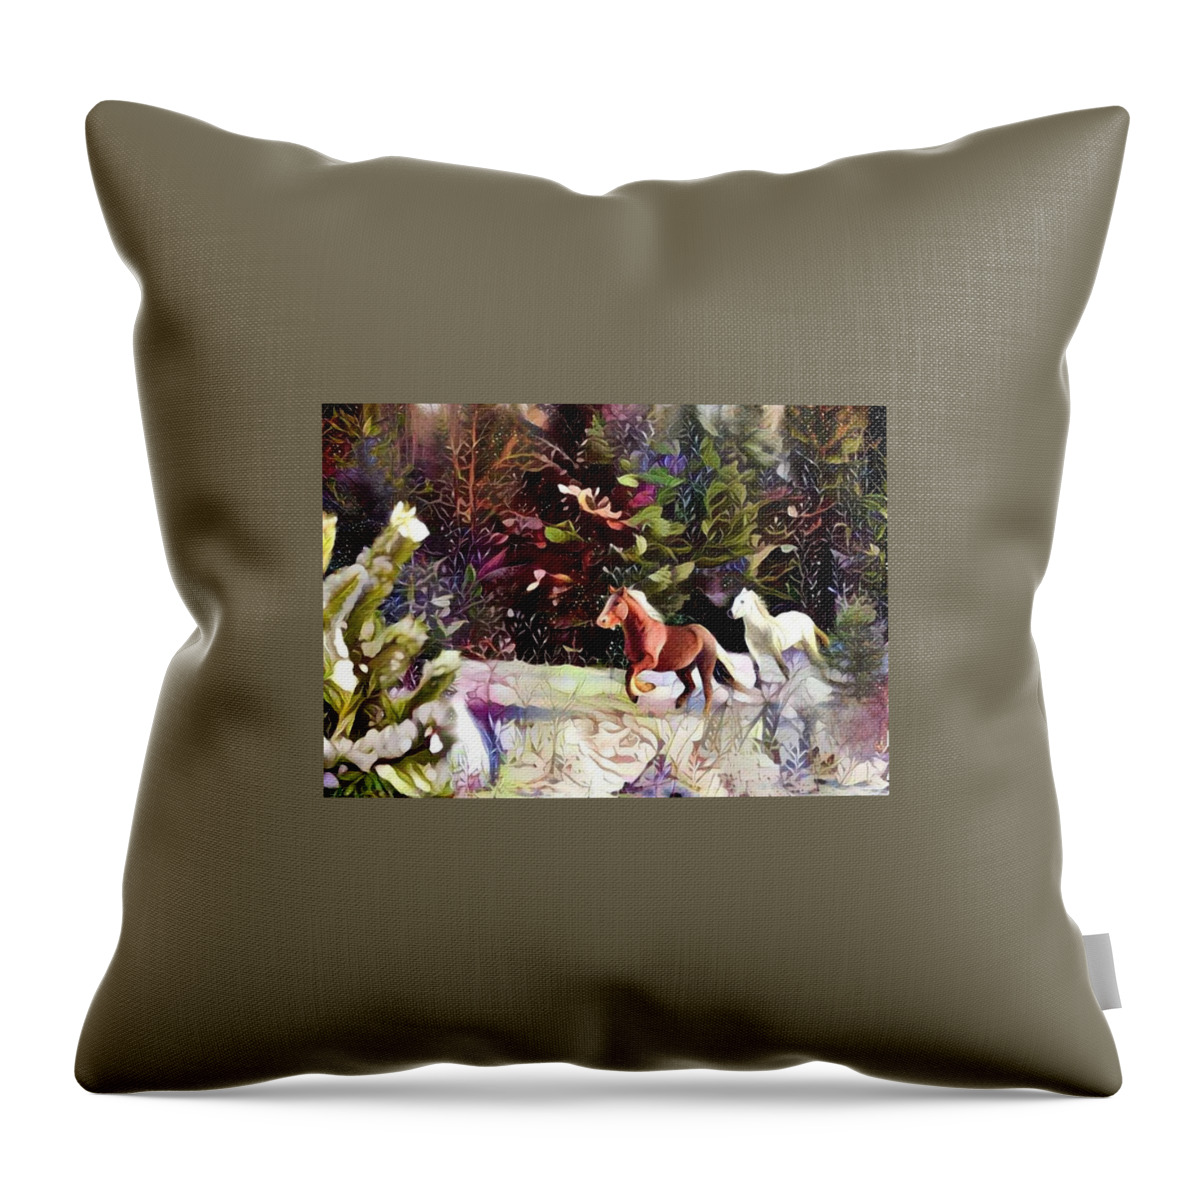 Belgian Horse Throw Pillow featuring the digital art Field Gallop 2 by Listen To Your Horse